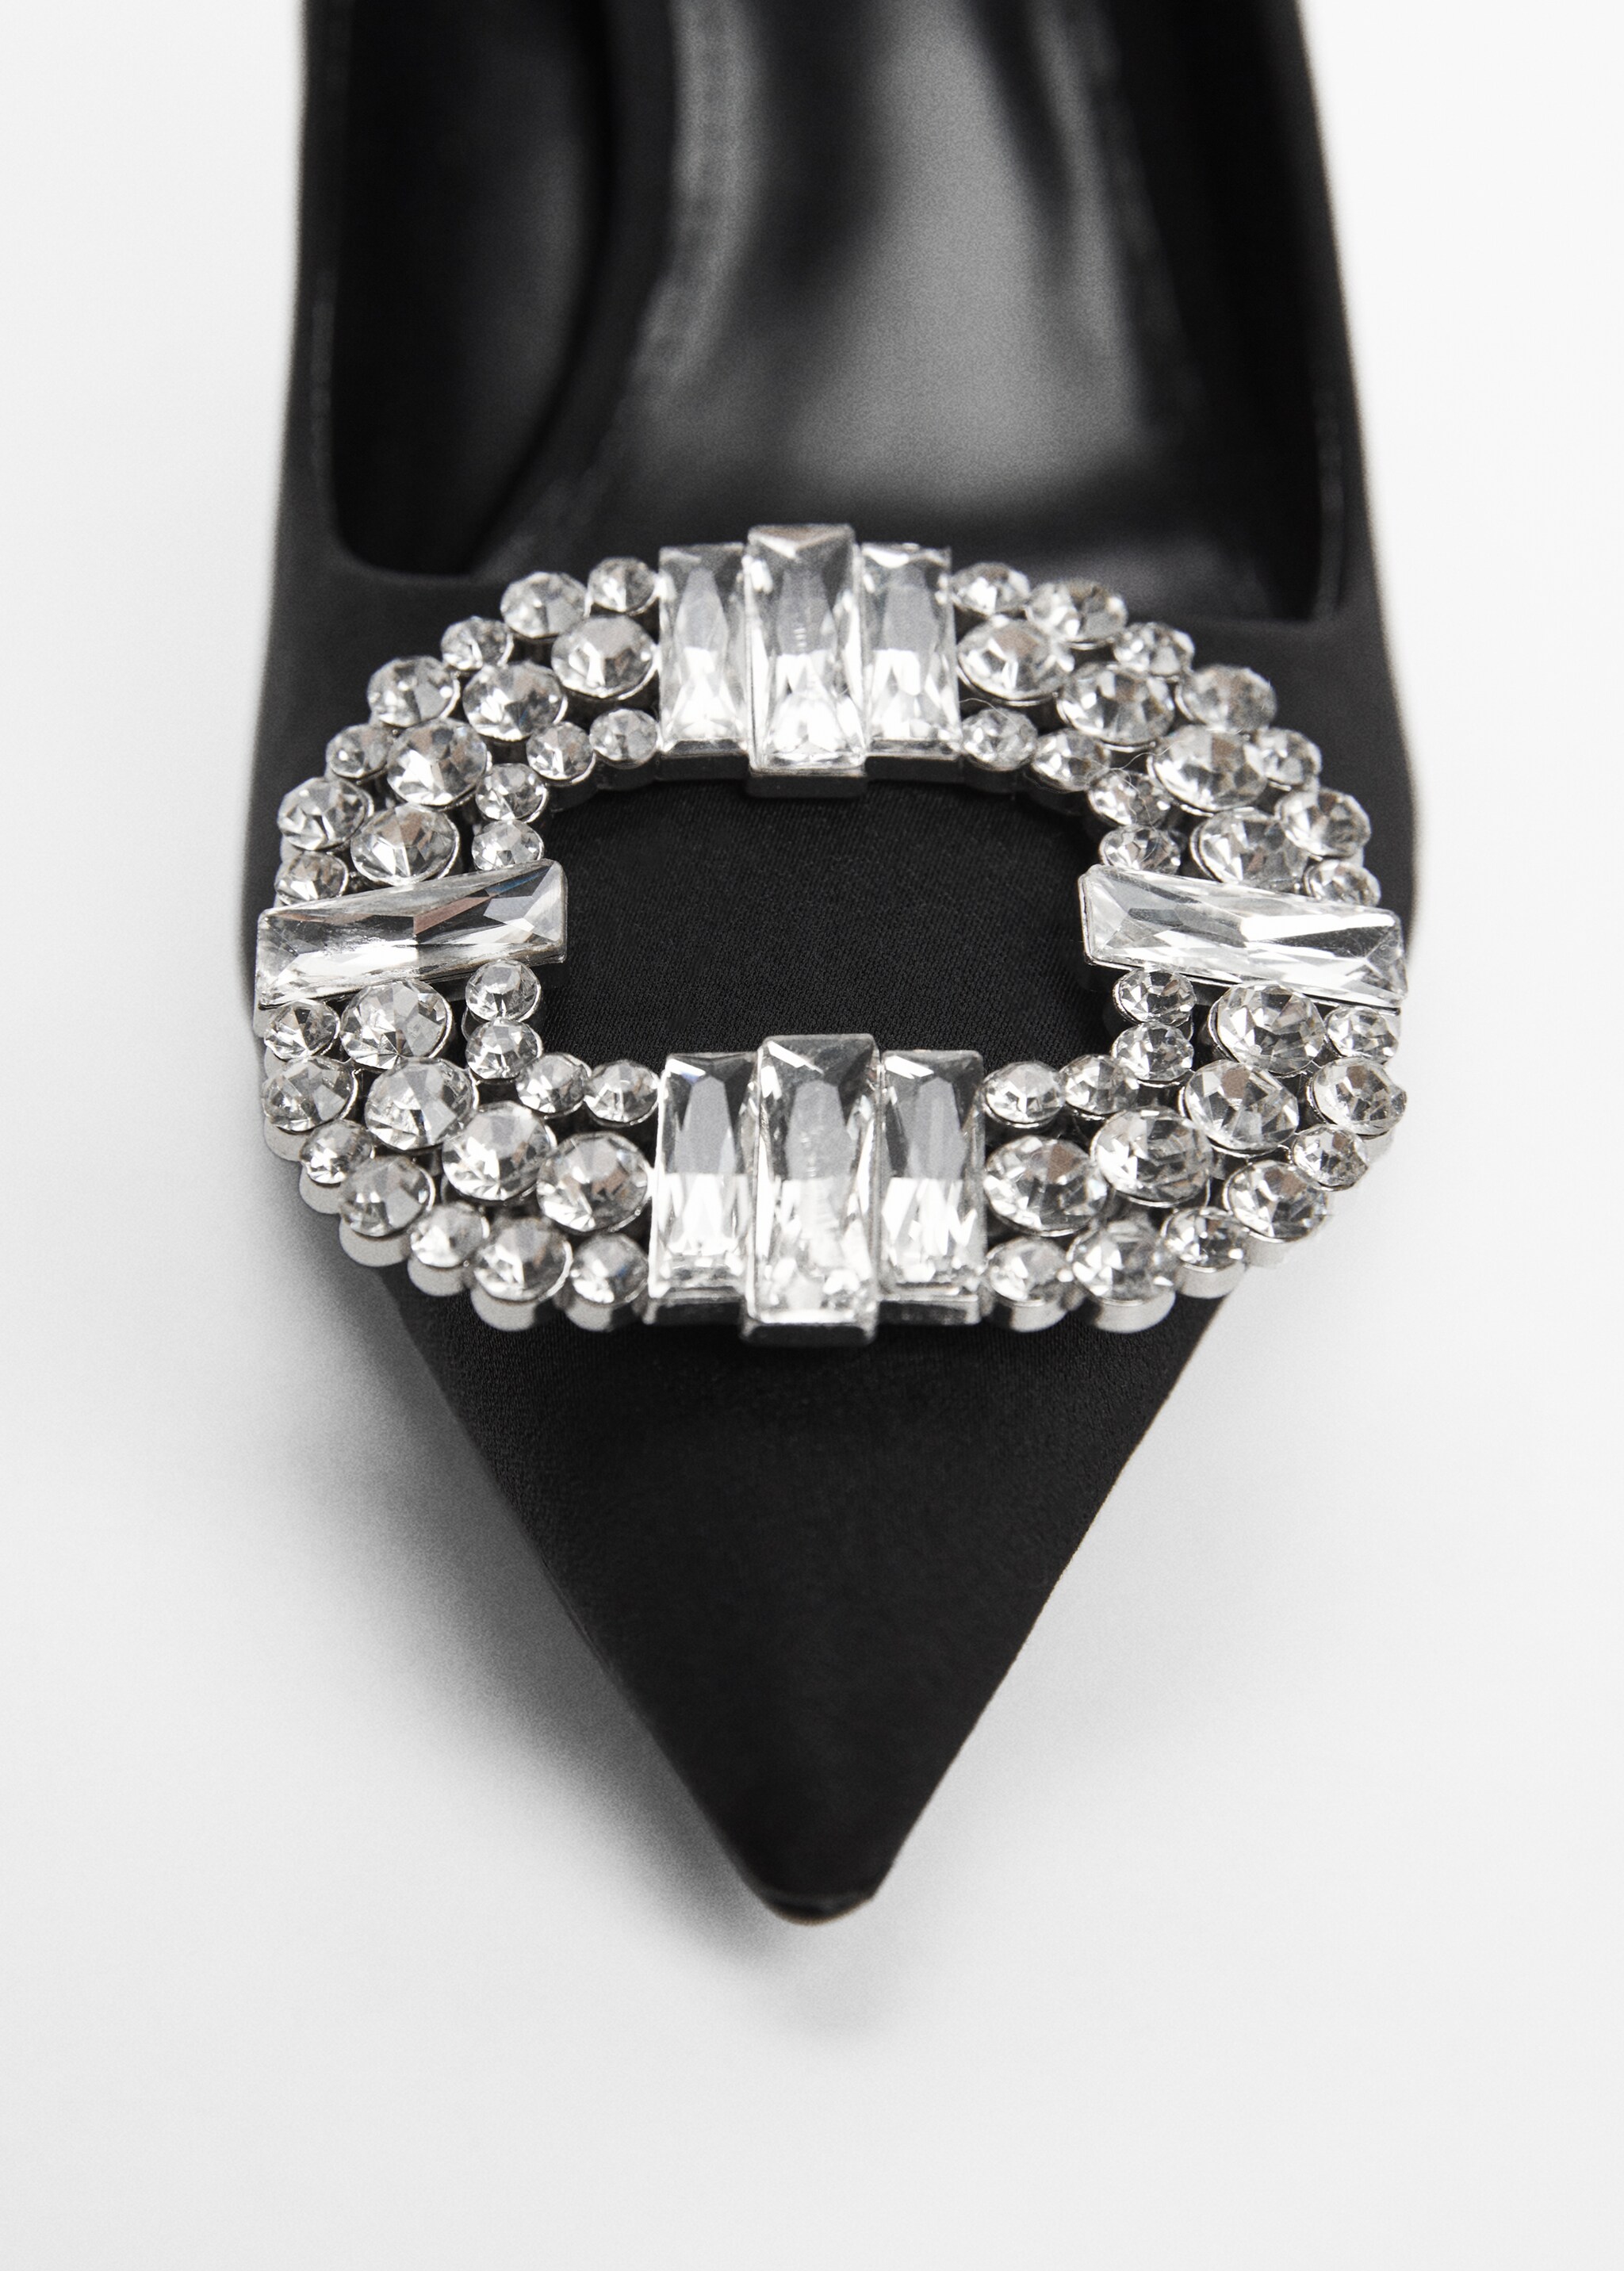 Jewel-heel shoes - Details of the article 1